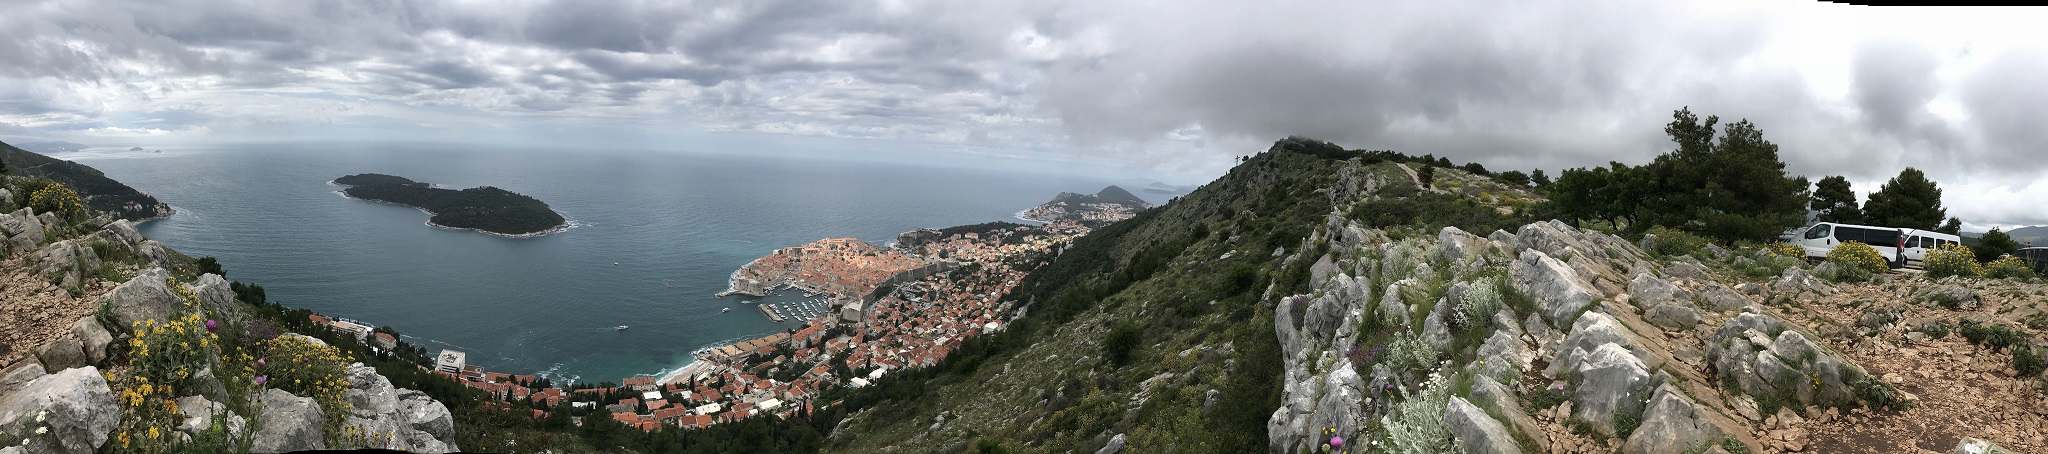 panorama view from mt srd.jpg